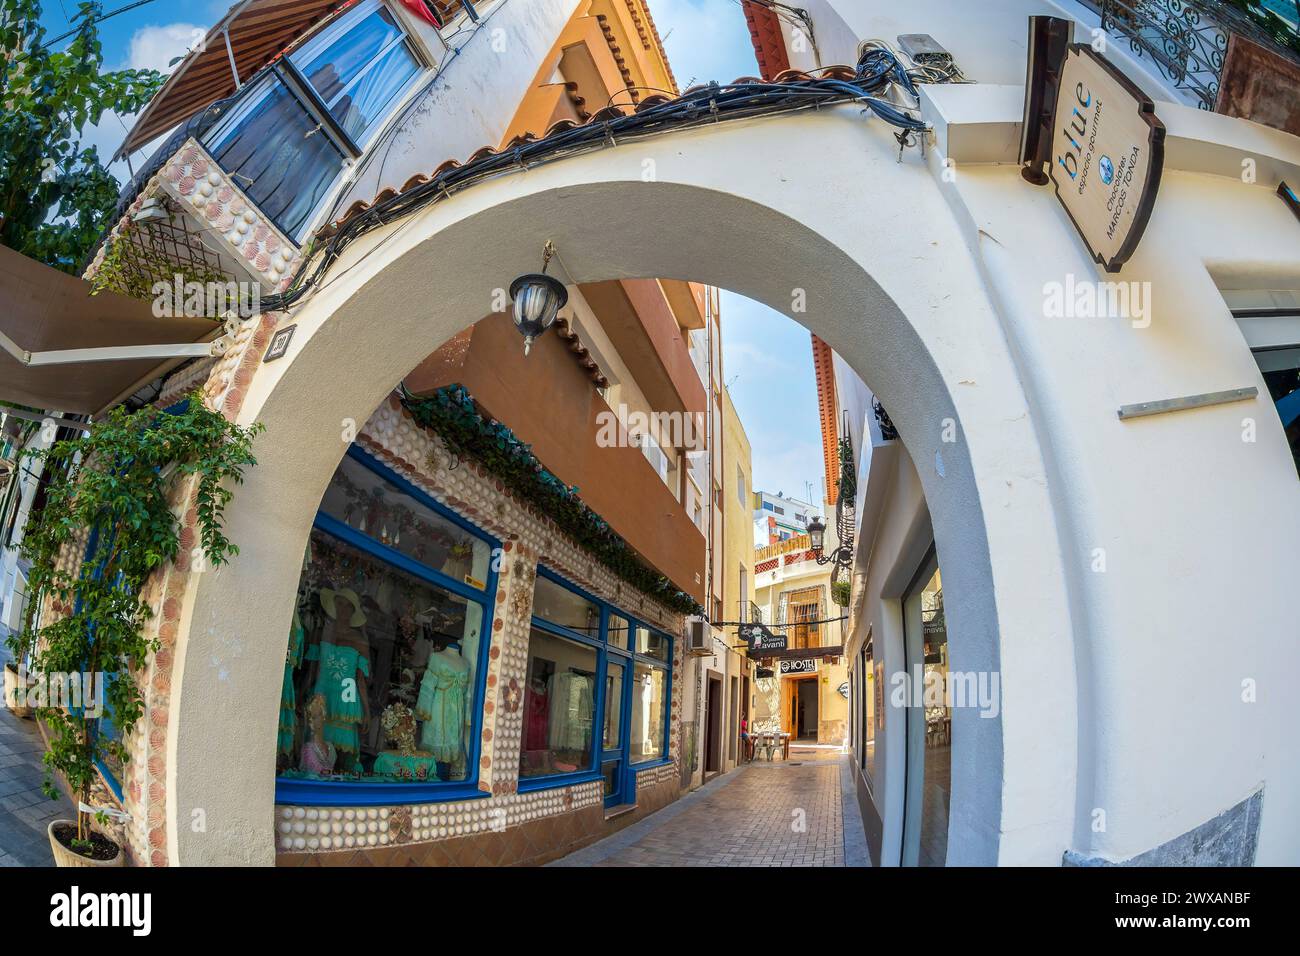 BENIDORM, SPAIN - AUGUST 14, 2020: View with small and picturesque street with shops, located in the historical center of the city. Stock Photo